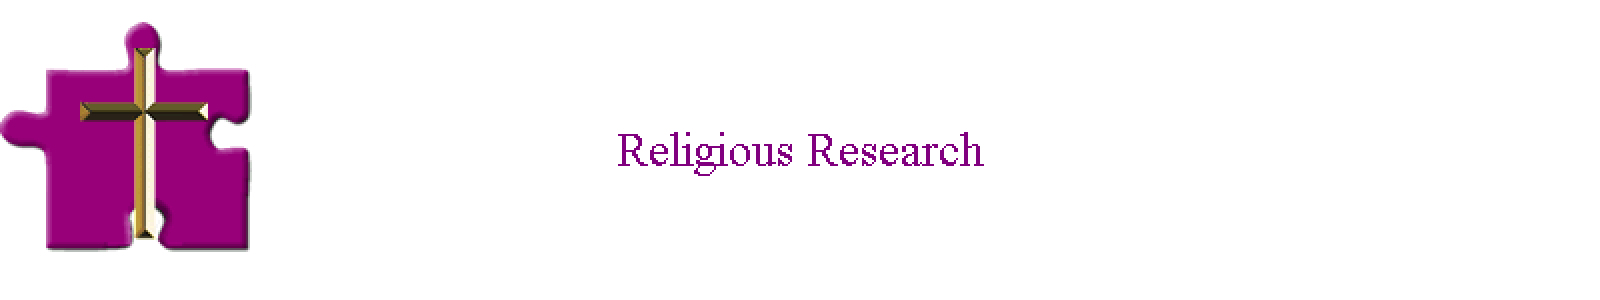 Religious Research